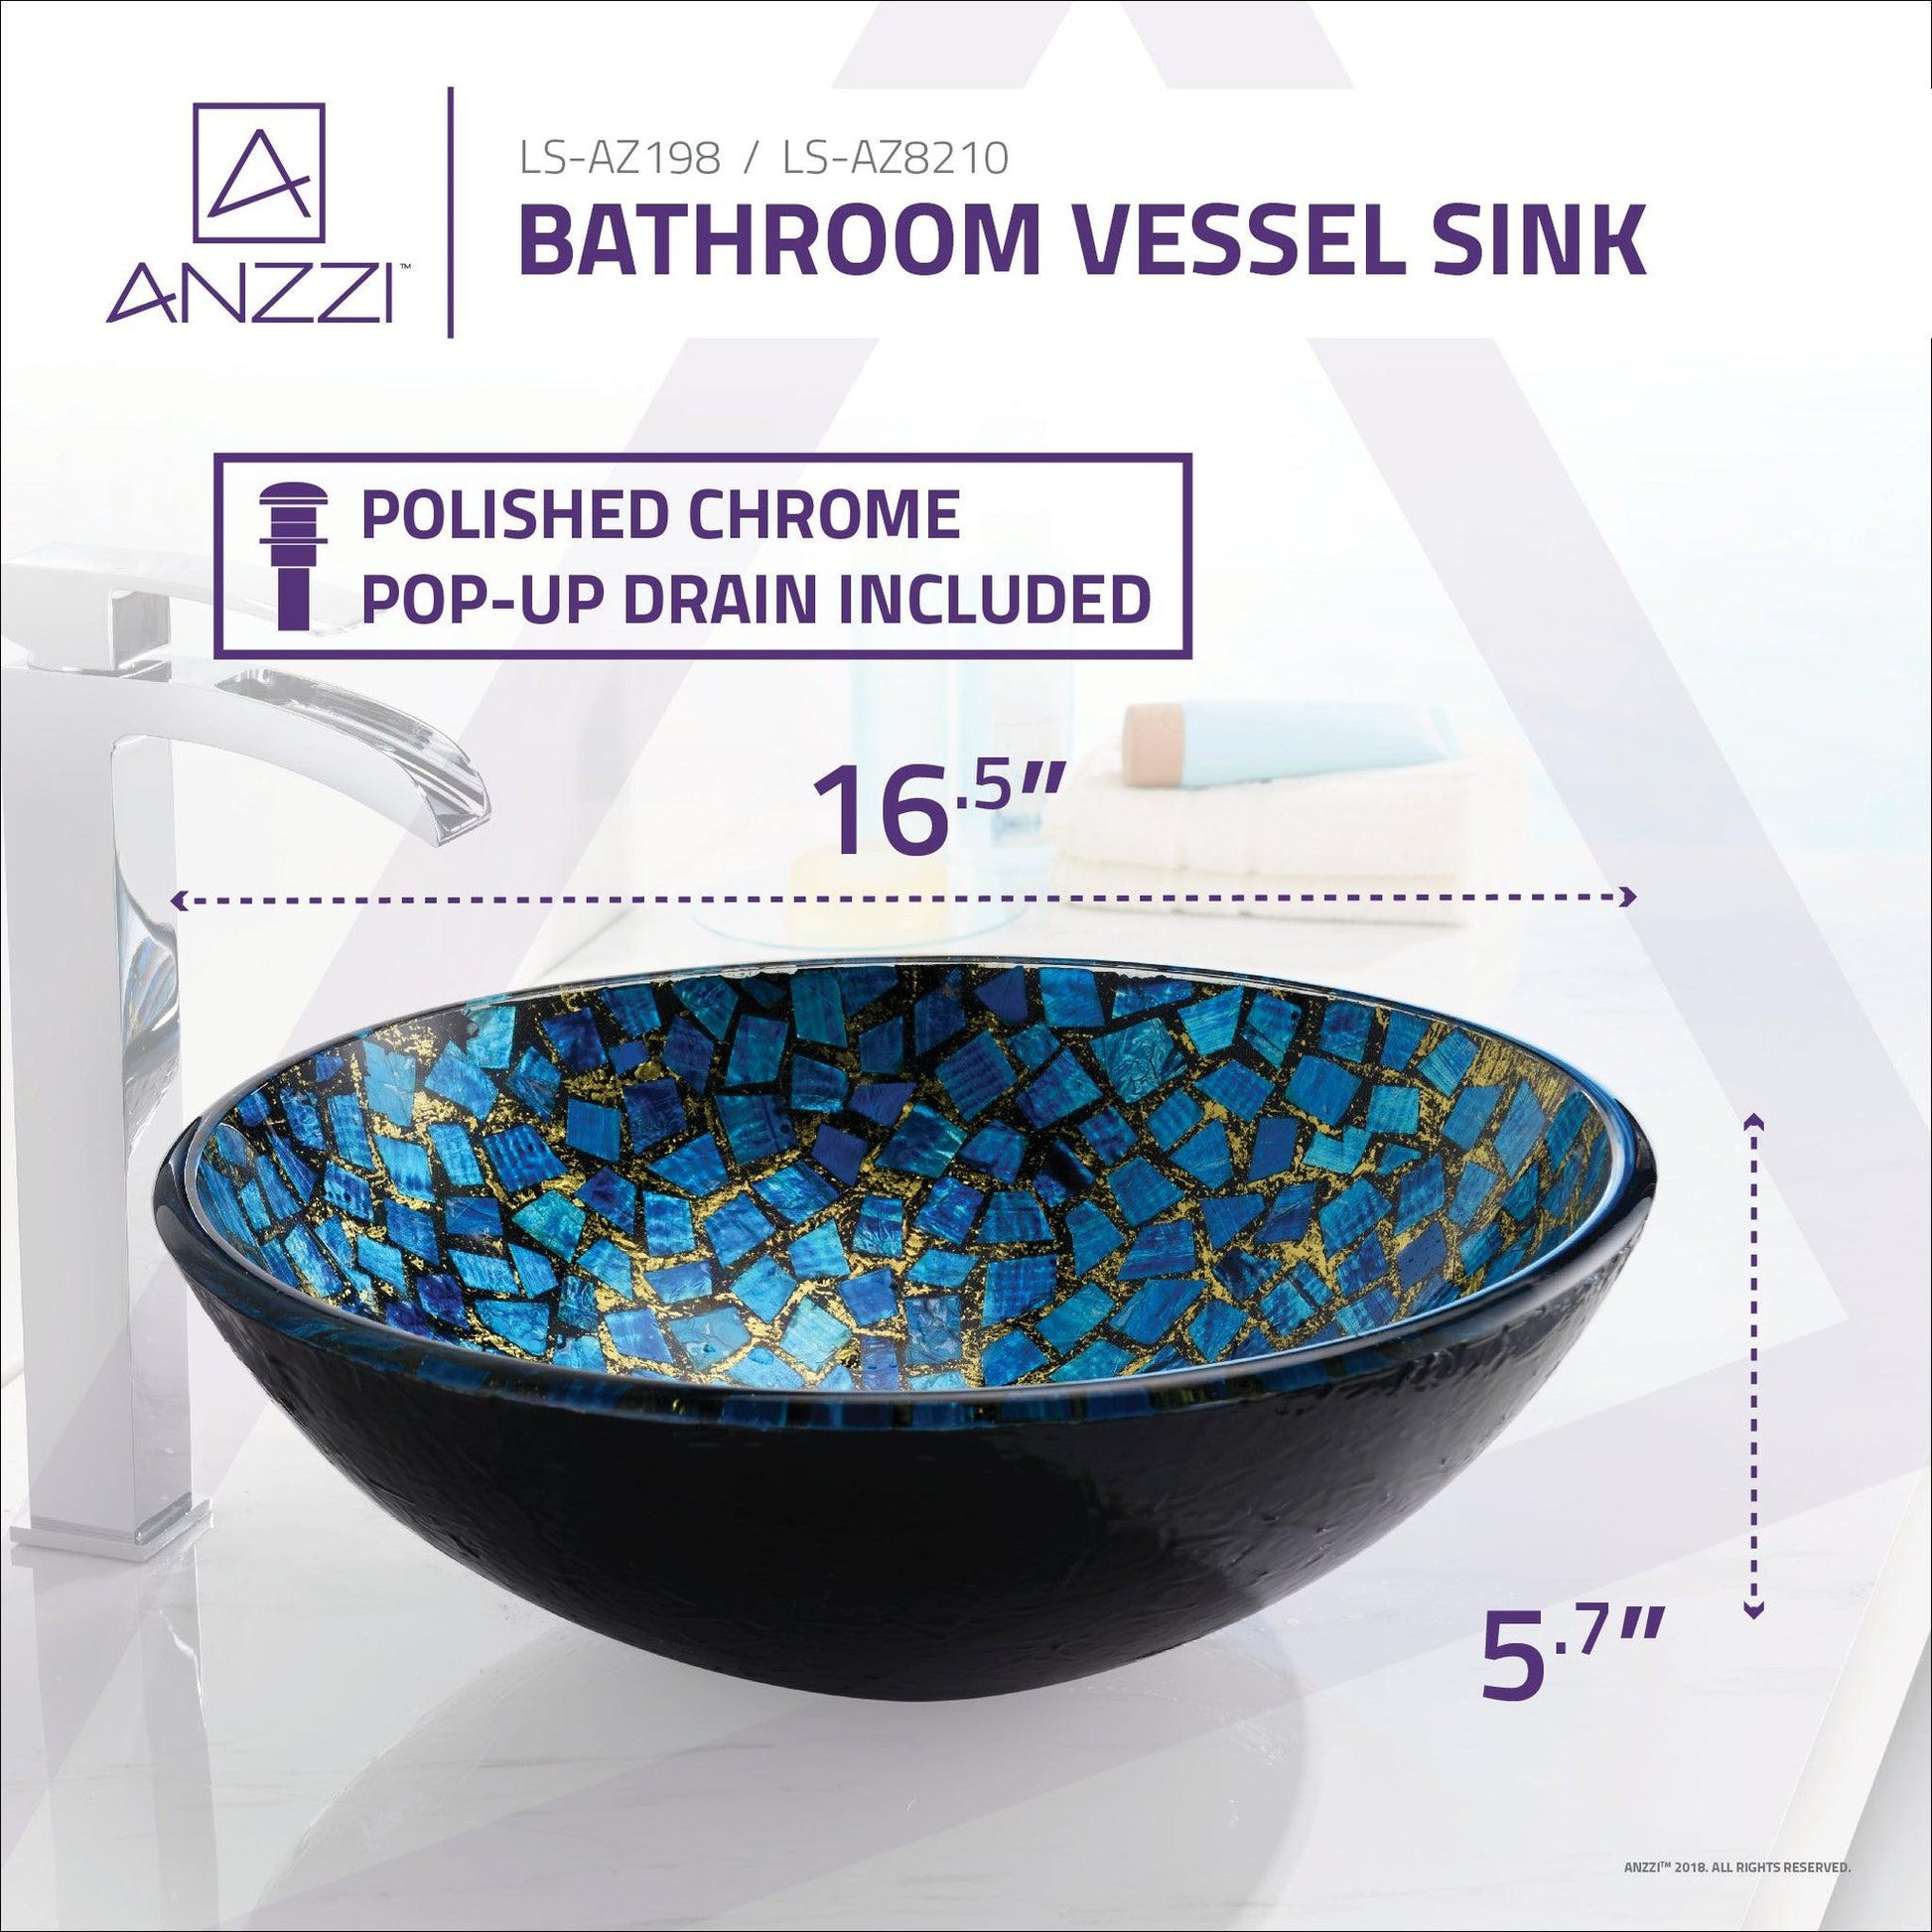 ANZZI Mosaic Series 17" x 17" Round Blue Deco-Glass Vessel Sink With Polished Chrome Pop-Up Drain